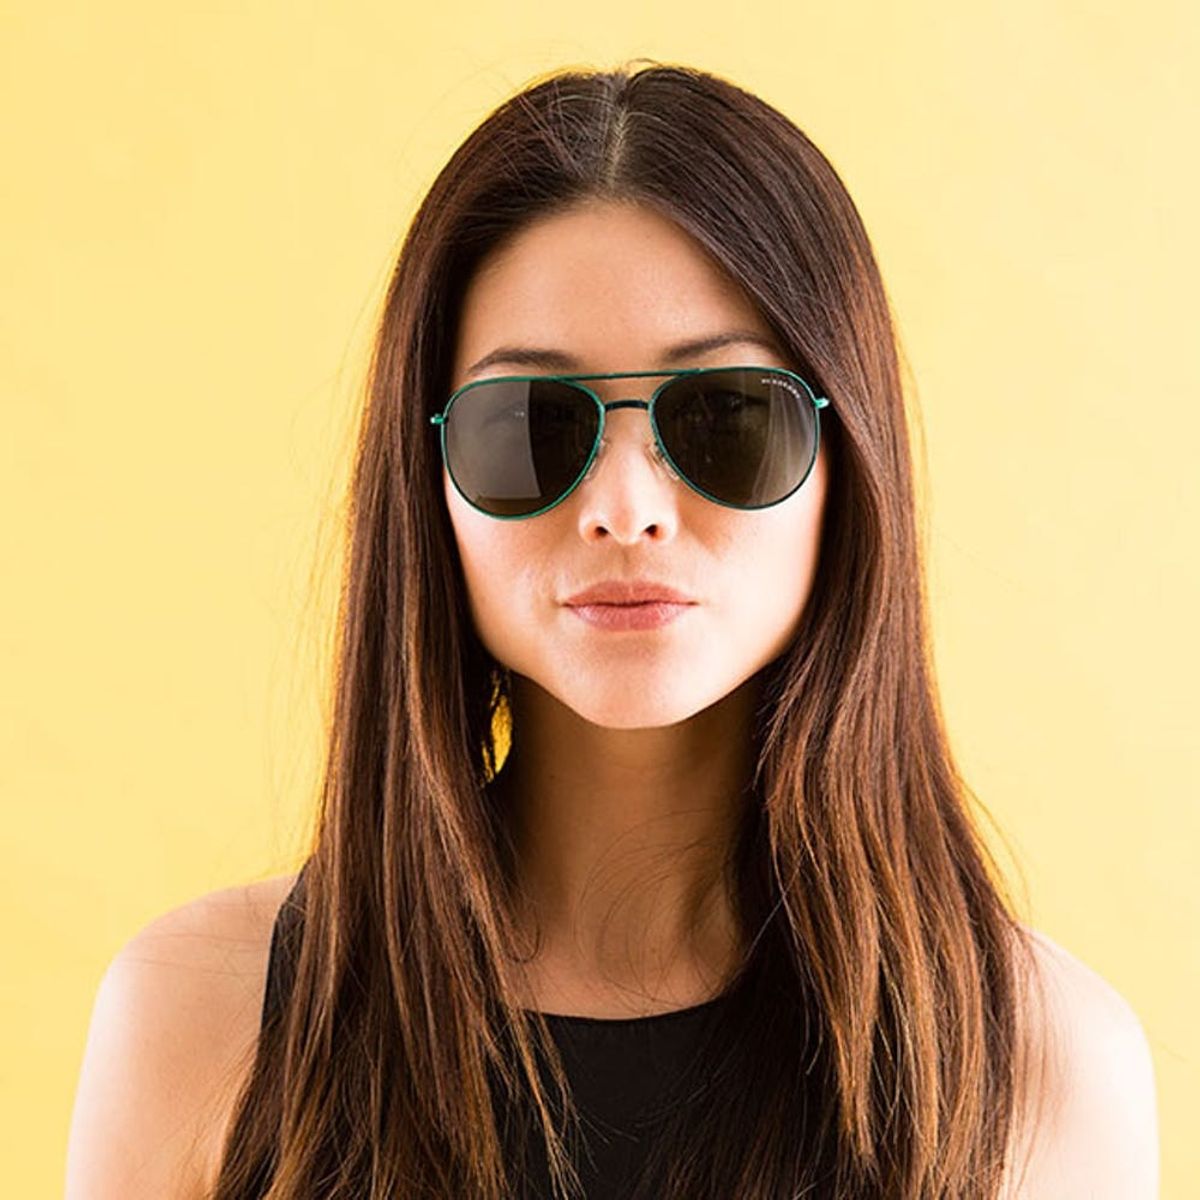 How to Find the Best Sunglasses for Your Face Shape - Brit + Co